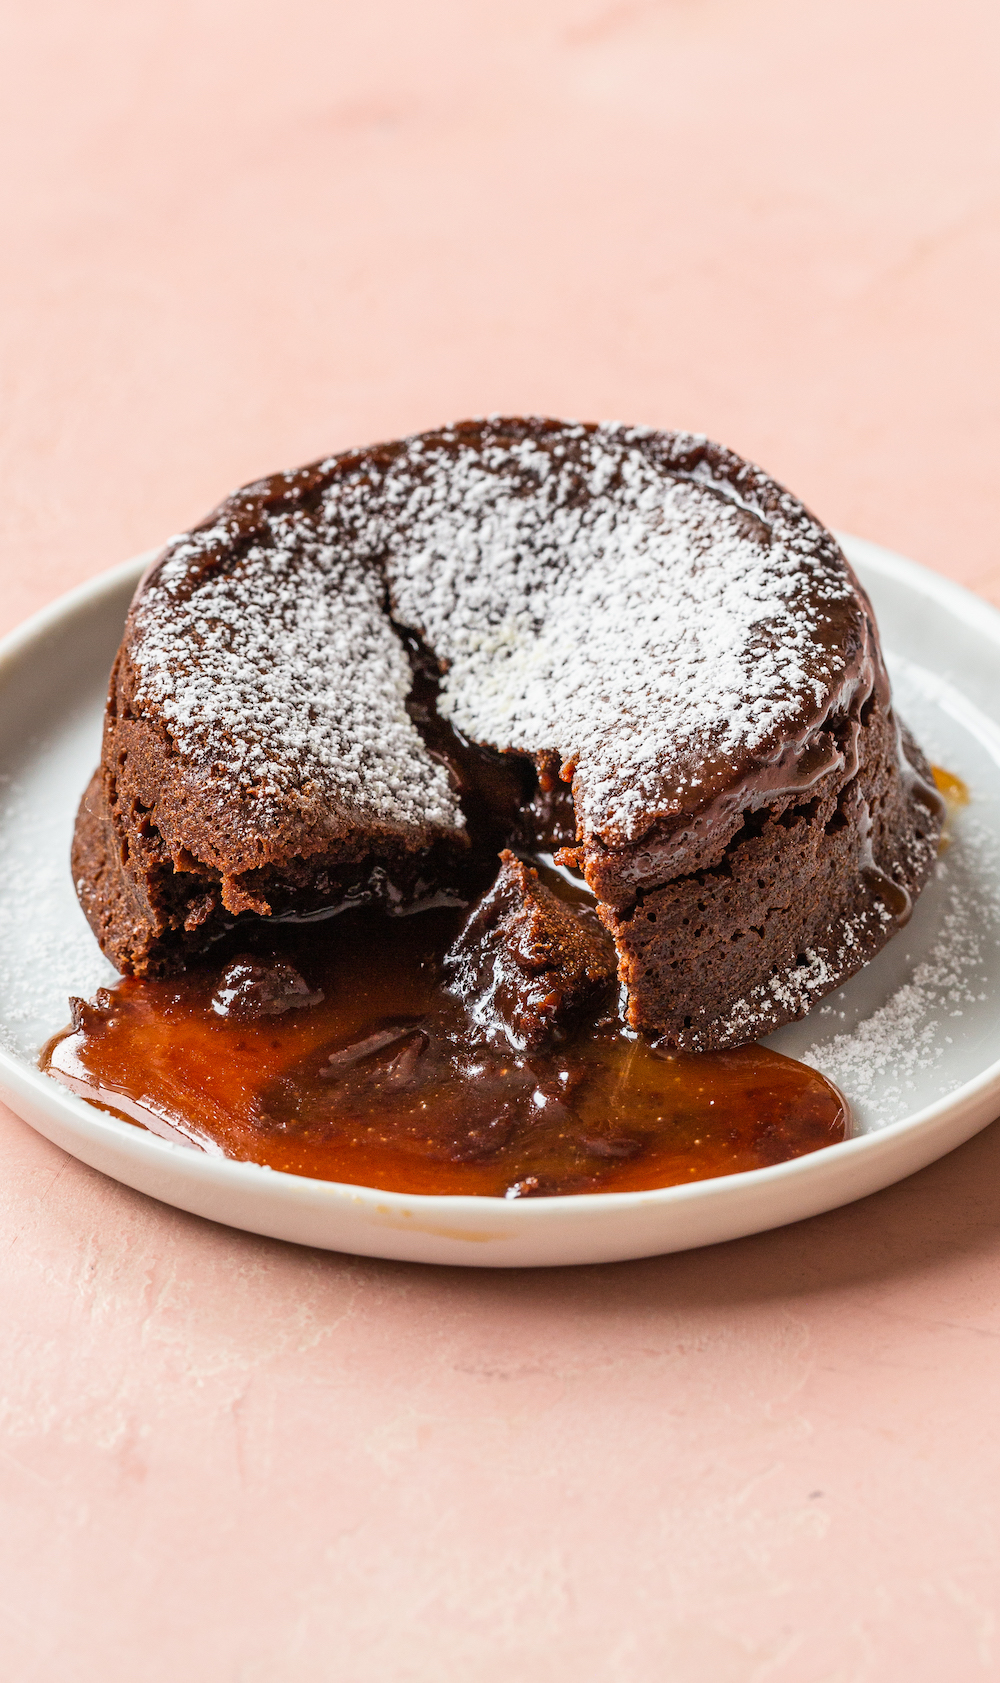 How to Make Chocolate Lava Cakes - Sally's Baking Addiction